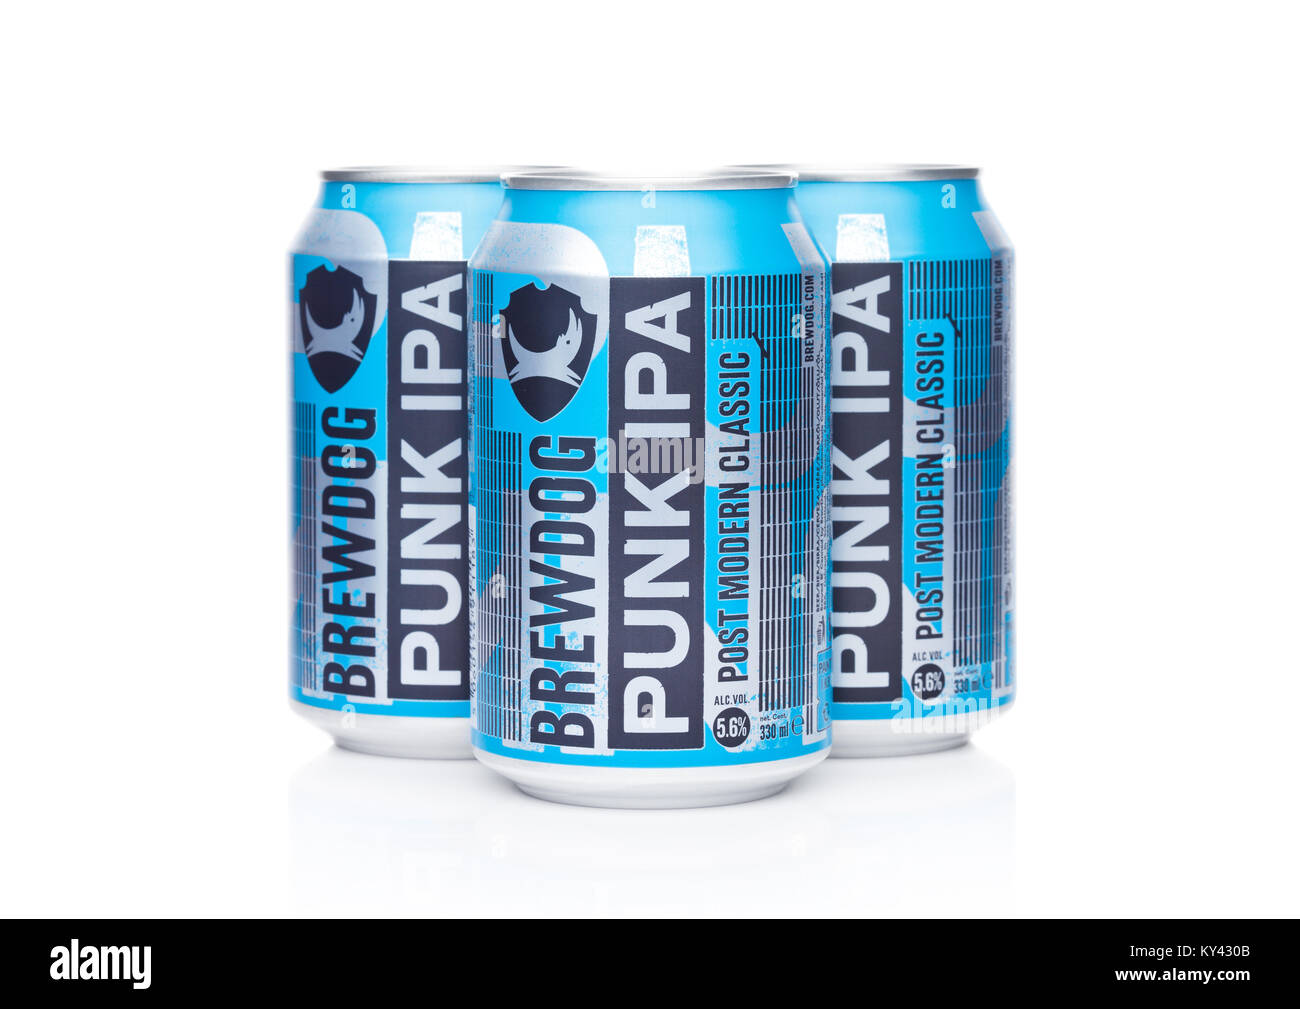 LONDON, UK - JANUARY 02, 2018: Aluminium cans of Brewdog Punk Ipa beer post modern classic, from the Brewdog brewery on white background. Stock Photo